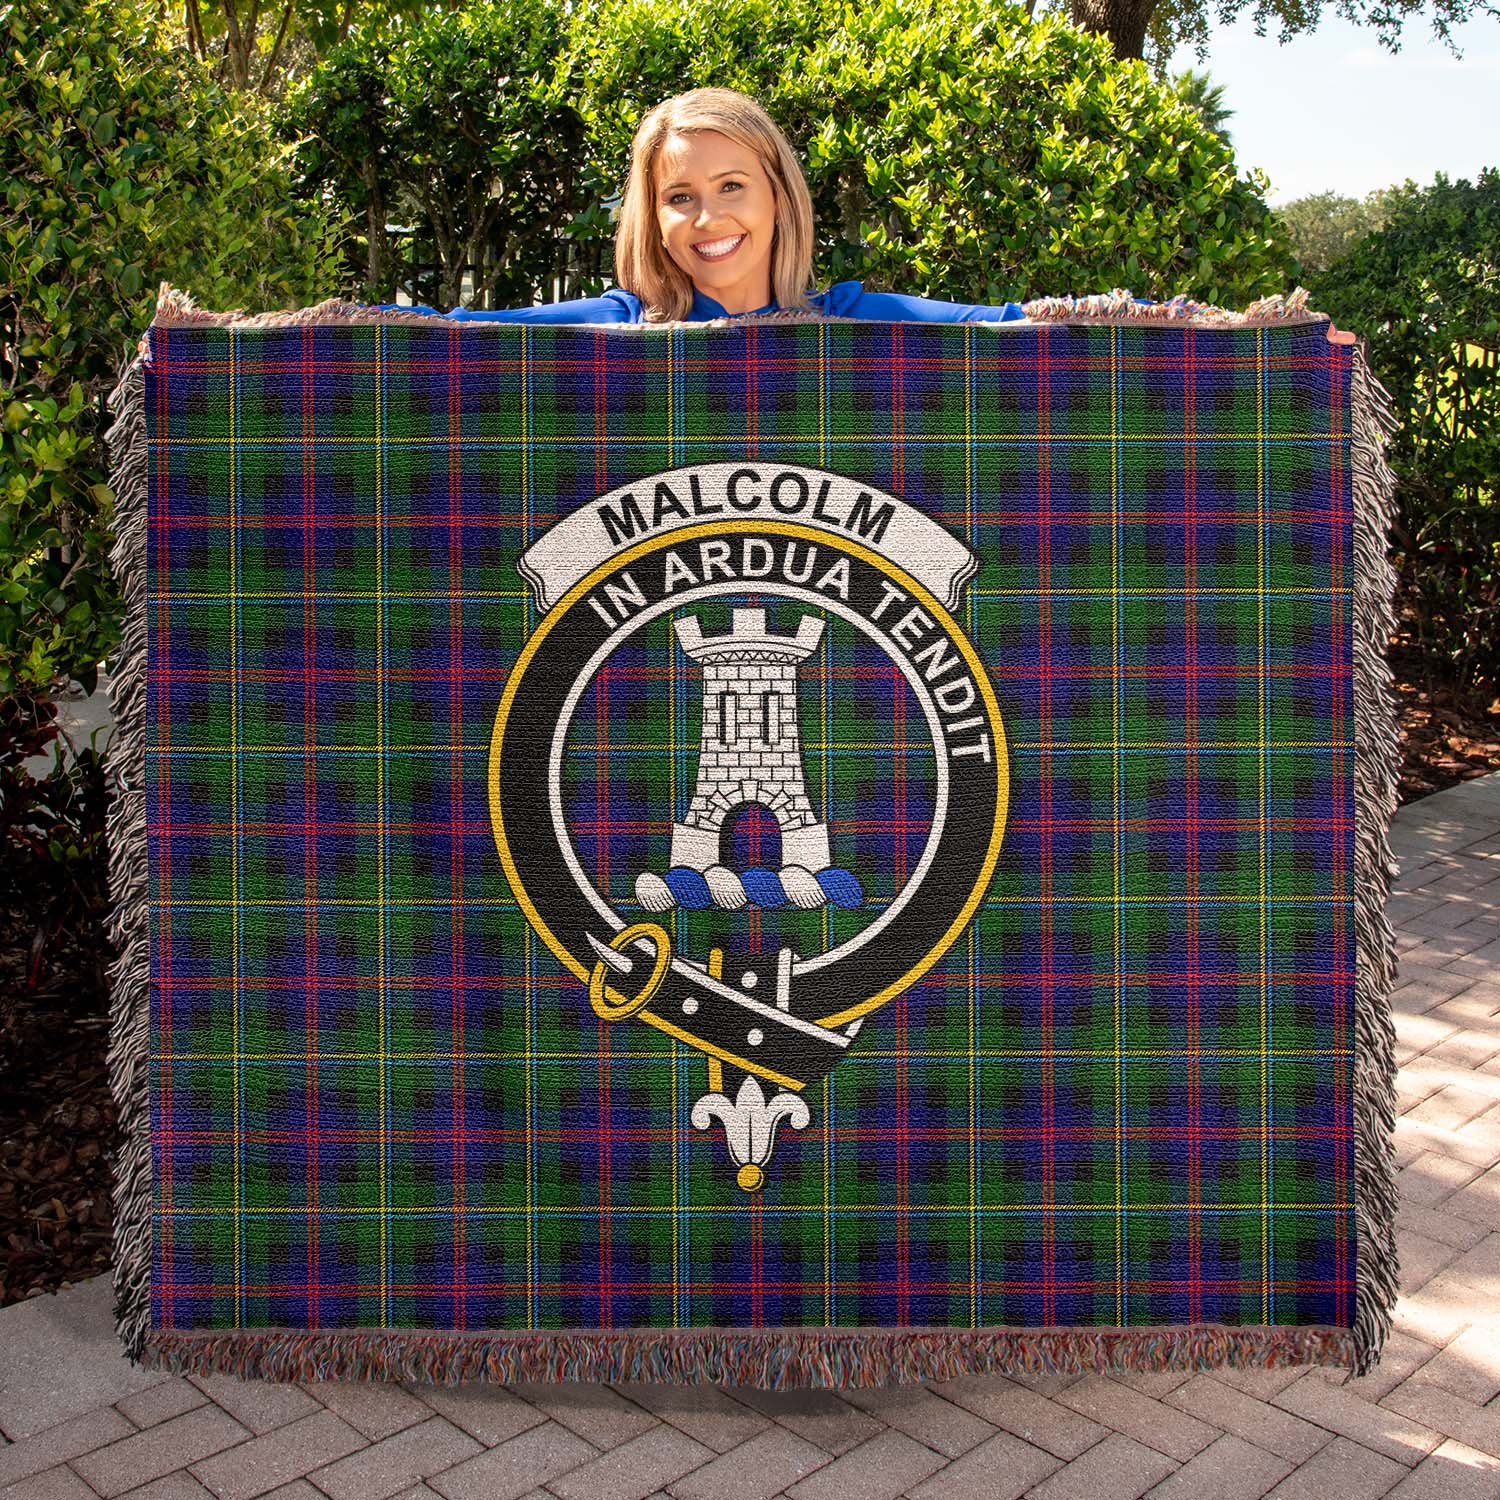 Tartan Vibes Clothing Malcolm Tartan Woven Blanket with Family Crest